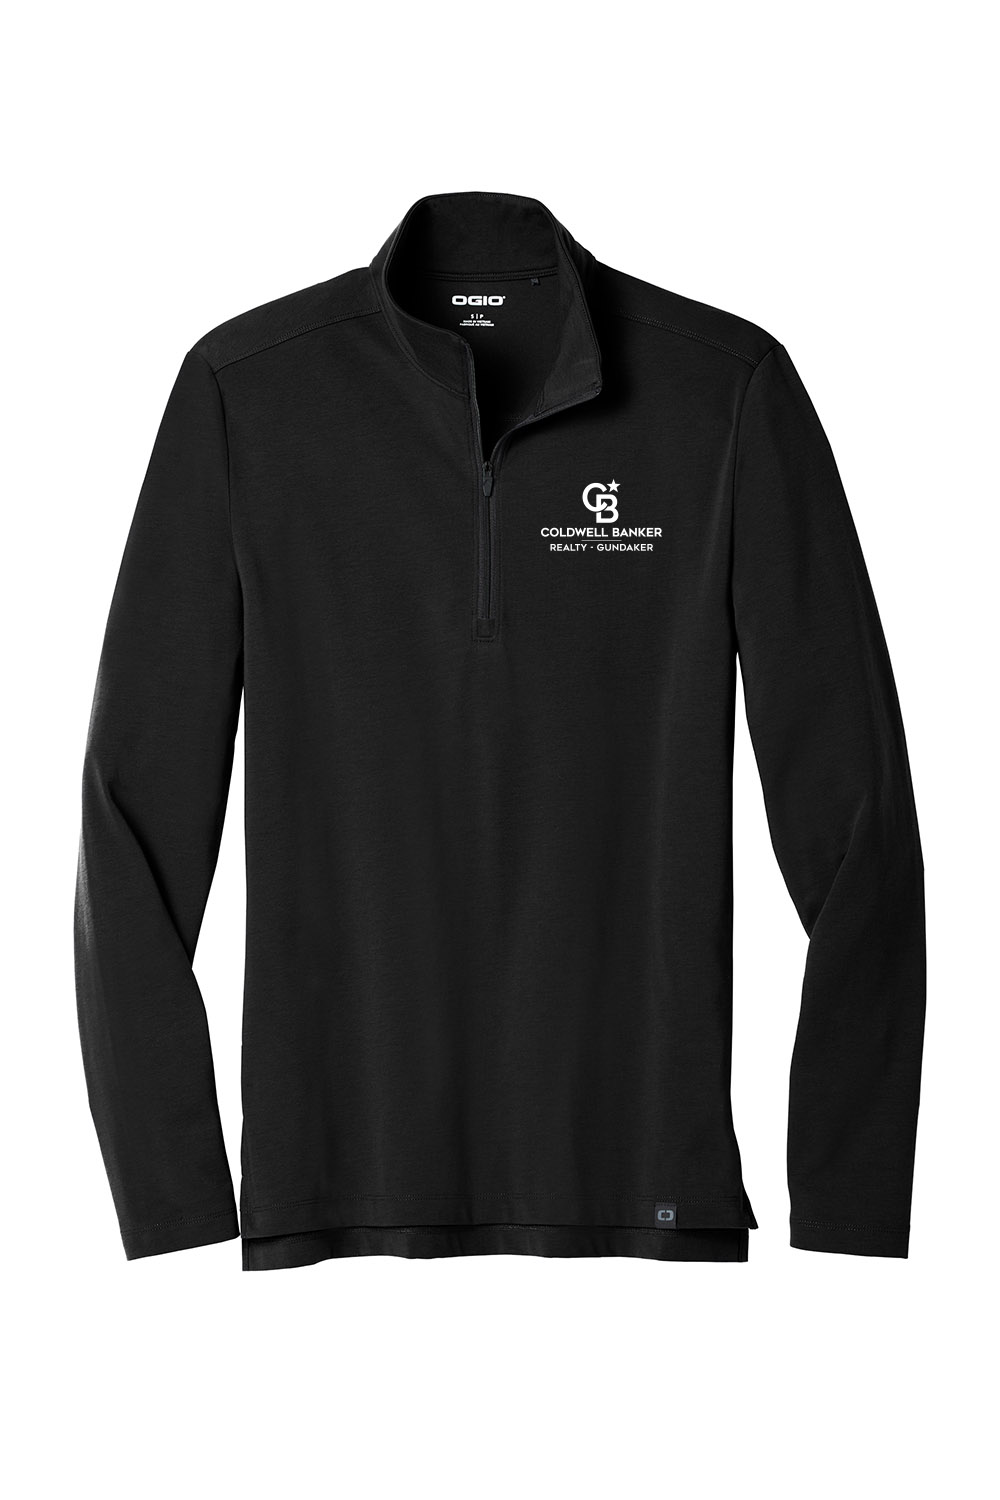 OGIO ® Limit 1/4-Zip – Coldwell Banker Gundaker Promotional Products